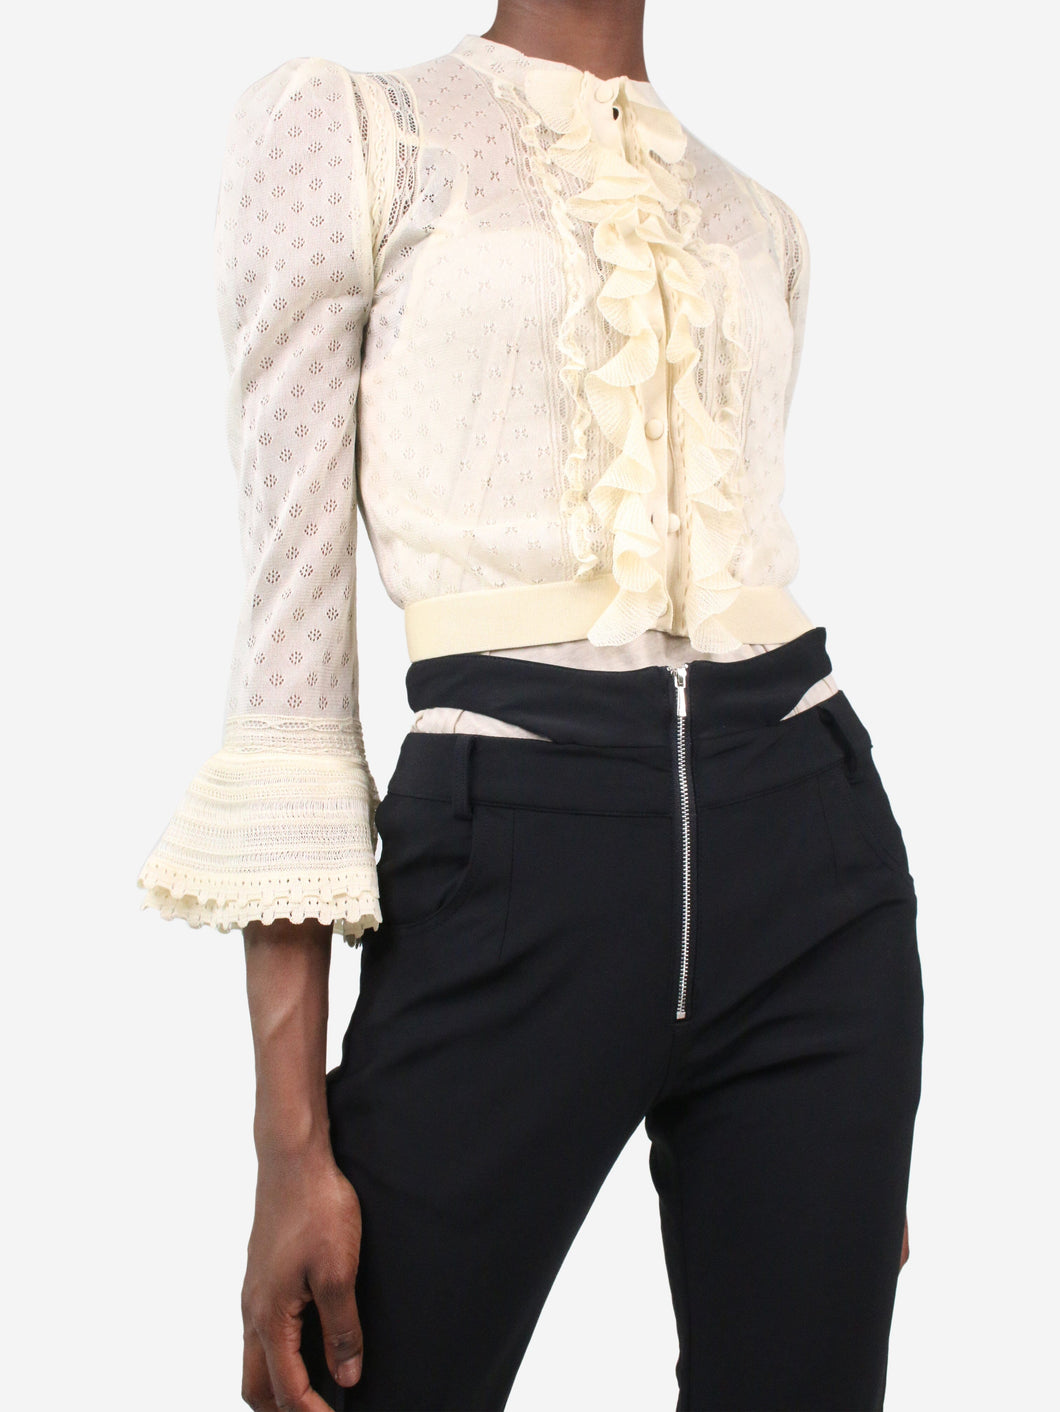 Alexander McQueen pre-owned cream lace frill cardigan | SOTT